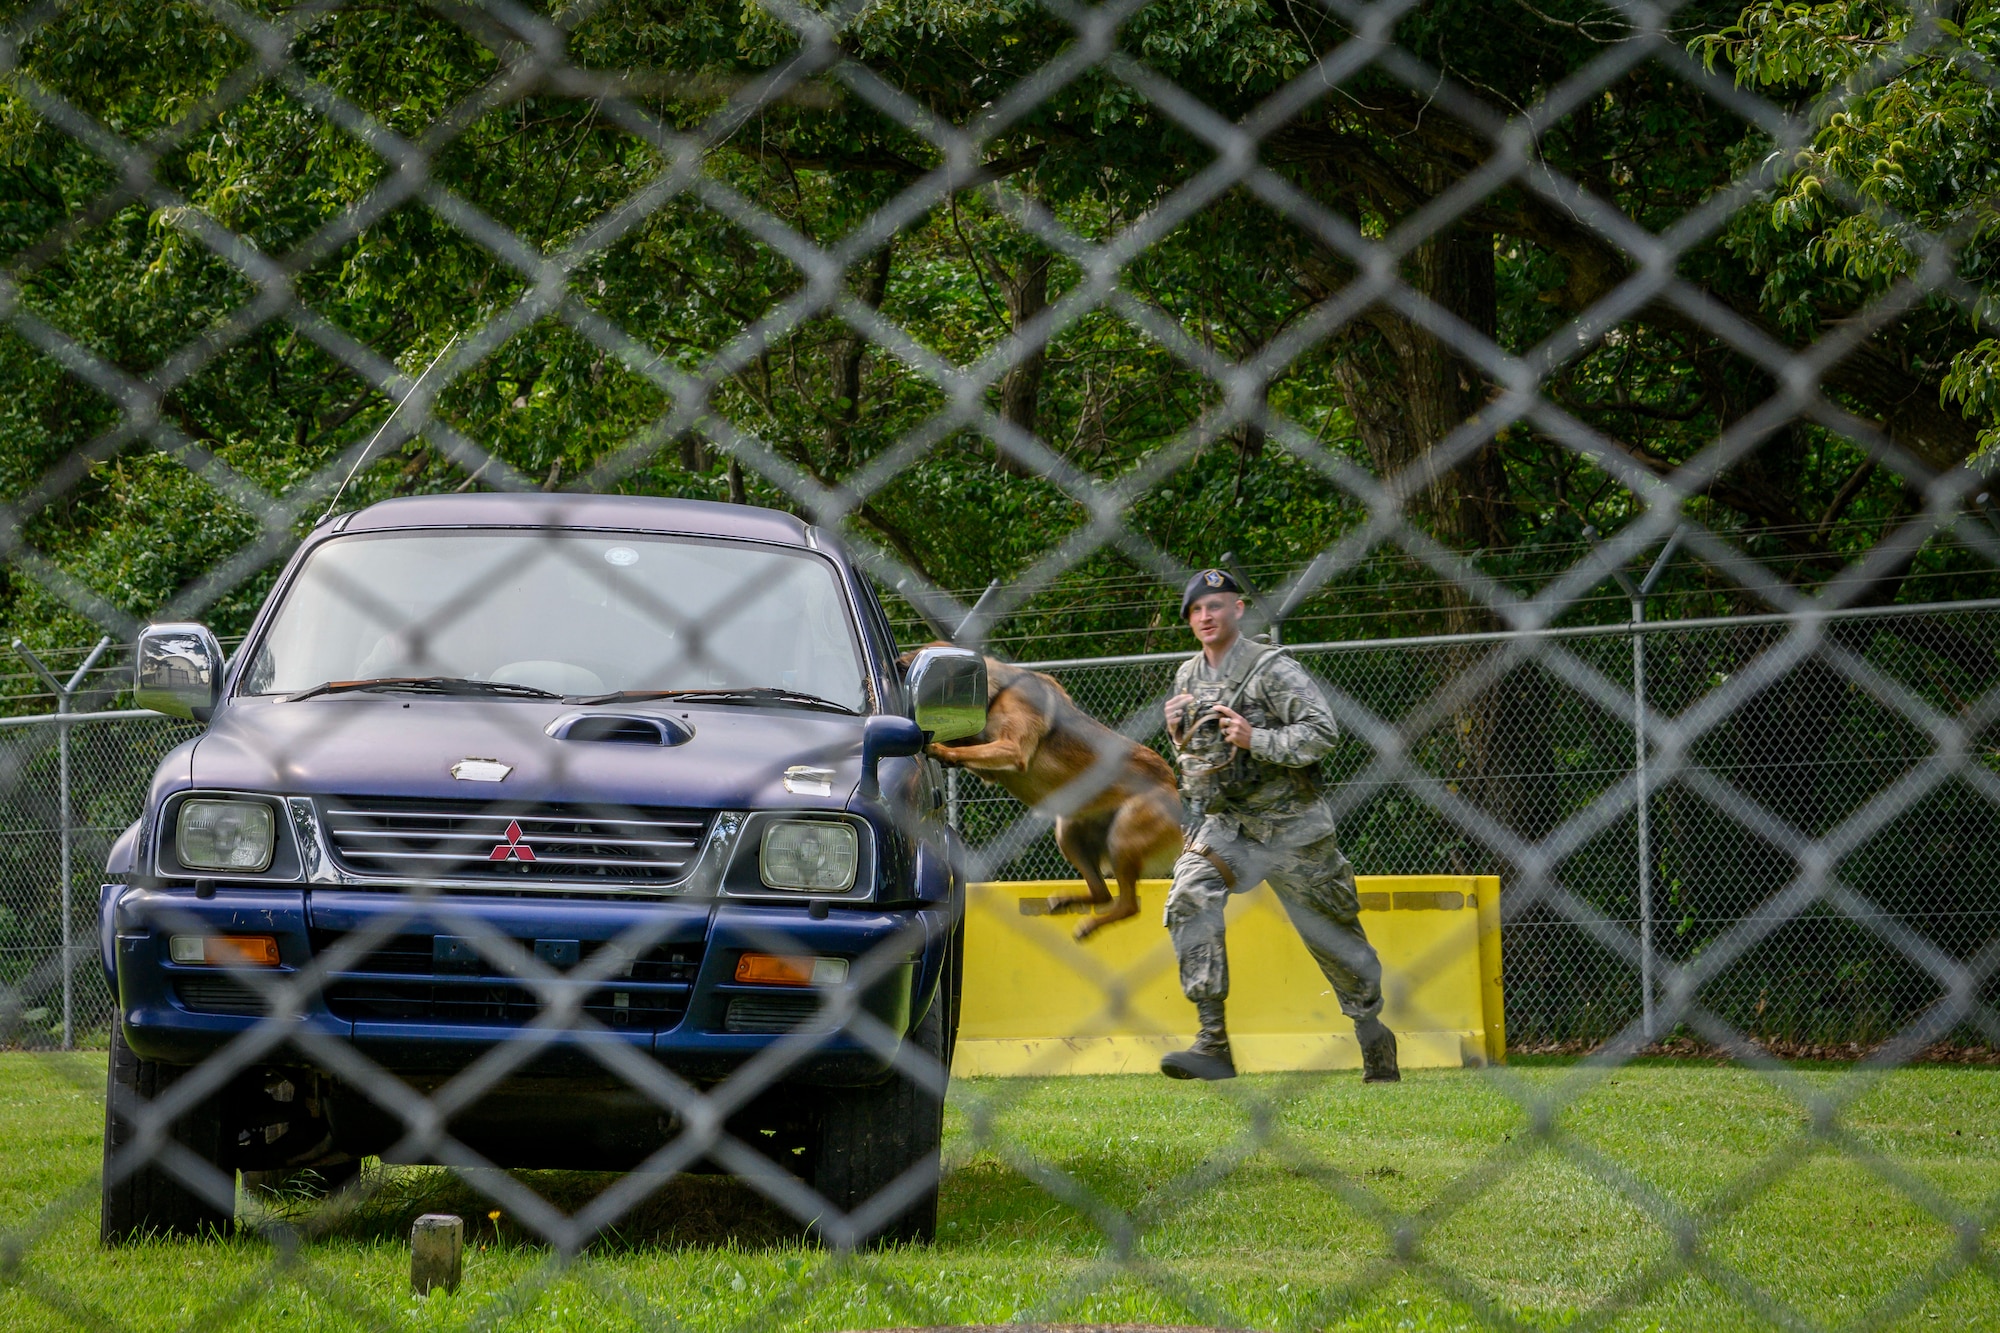 U.S. Air Force Staff Sgt. Anthony Reschka, a 35th Security Forces Squadron military working dog handler and Bella, a MWD, demonstrate a high risk vehicle extraction during a demonstration at Misawa Air Base, Japan, Sept. 17, 2020. Working dog handlers with the 35th Security Forces Squadron's K-9 unit display the skills of their dogs during a demonstration for Chief Master Sgt. Rick Winegardner Jr, the U.S. Forces Japan command chief. Military working dogs train in phases of controlled aggression, which consist of field interviews, pursuit and attacks, search and escorts, search and re-attacks, and stand-offs. (U.S. Air Force photo by Airman 1st Class China M. Shock)